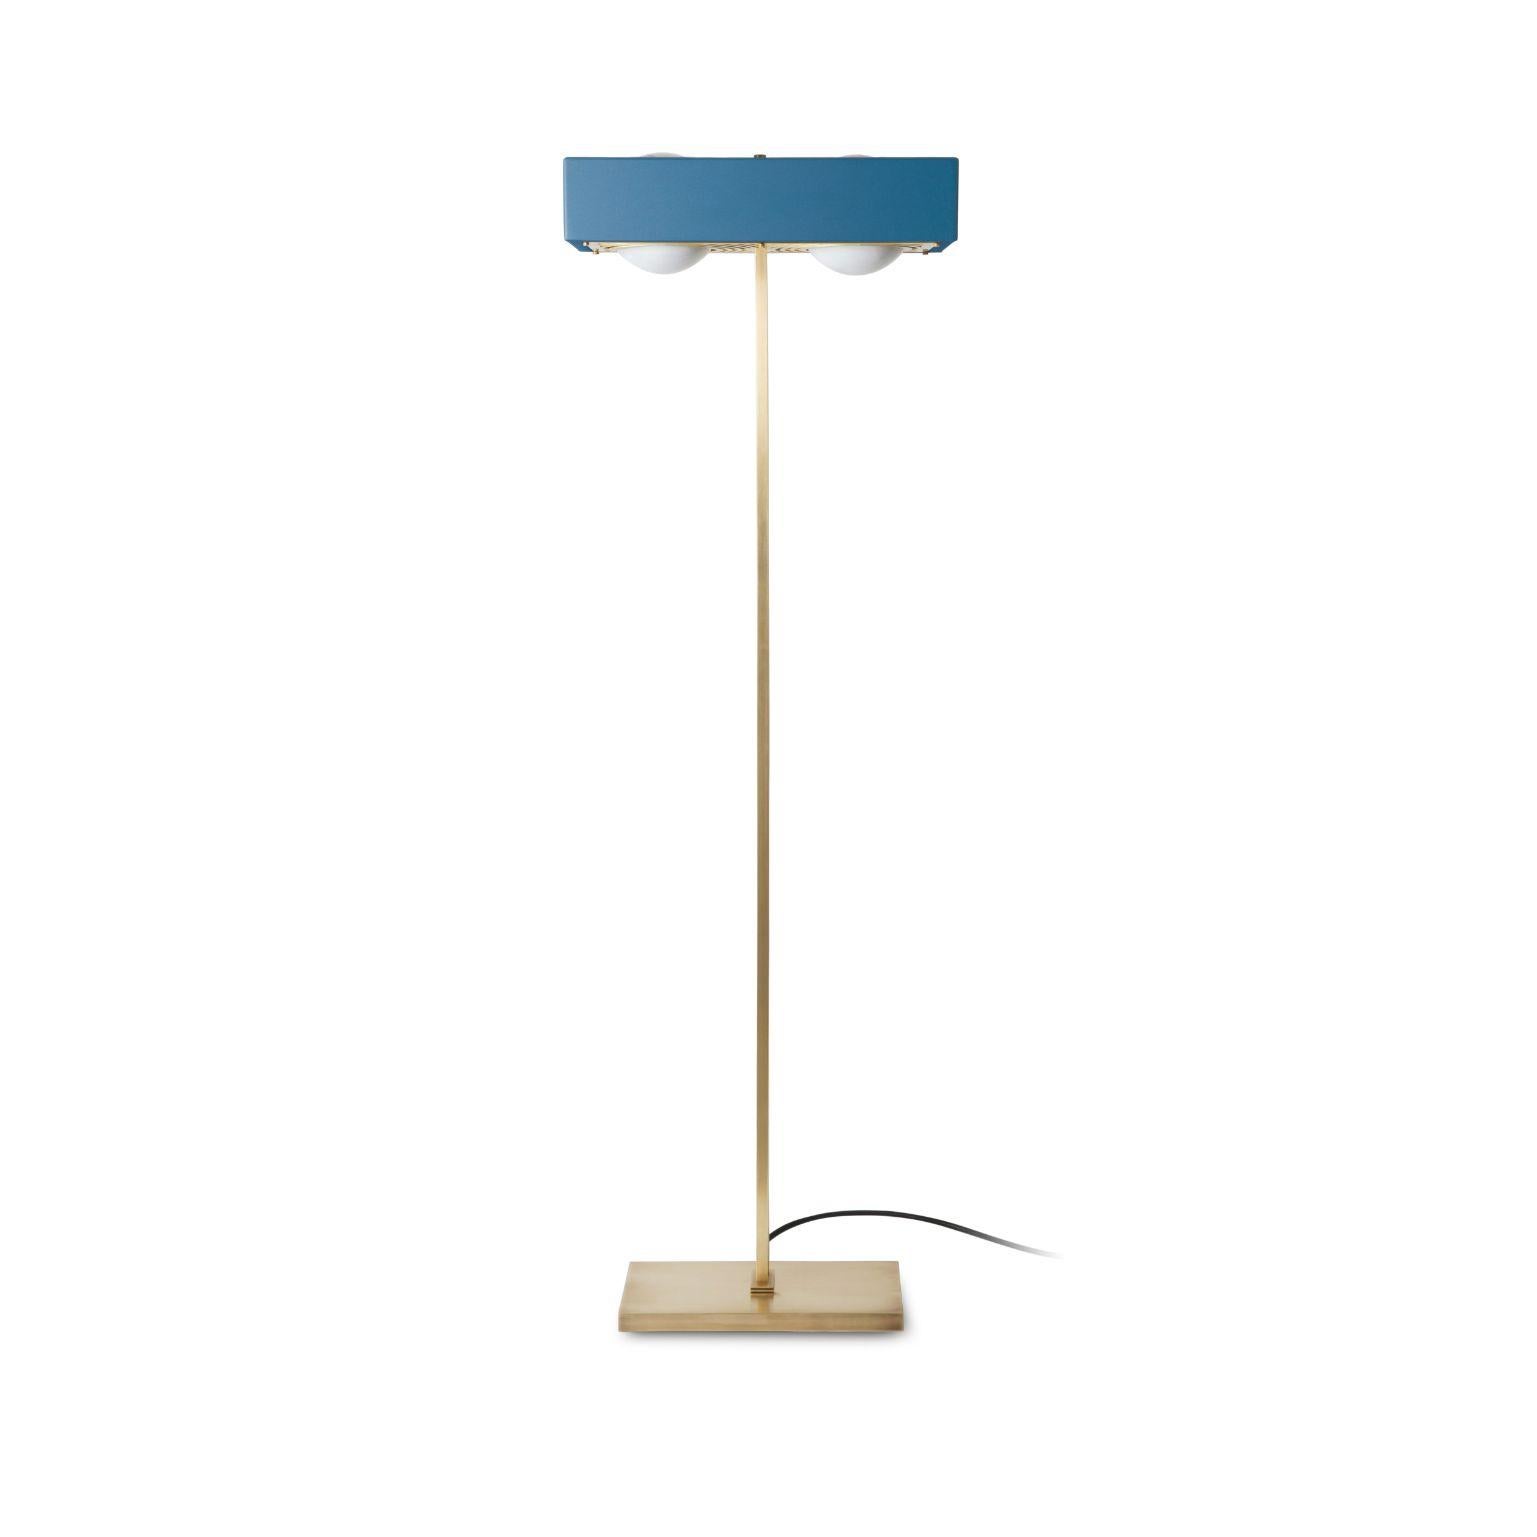 Kernel floor light - Blue by Bert Frank
Dimensions: 125 x 40 x 30 cm
Materials: Brass, steel

Brushed brass lacquered as standard, custom finishes available.

When Adam Yeats and Robbie Llewellyn founded Bert Frank in 2013 it was a meeting of minds